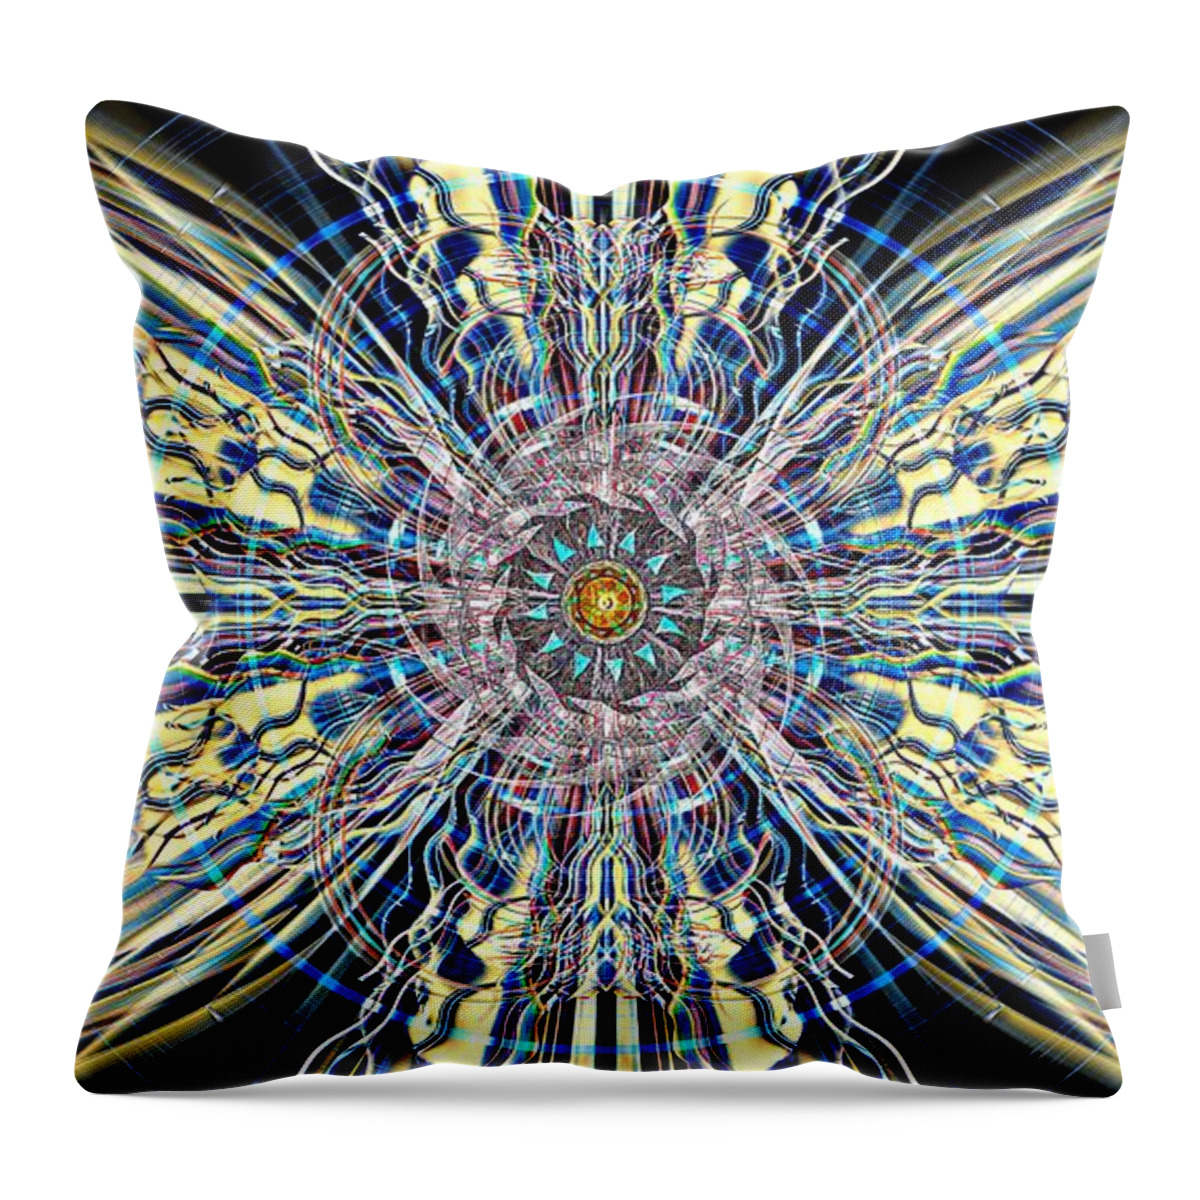 Background Throw Pillow featuring the digital art Plasmology by David Manlove